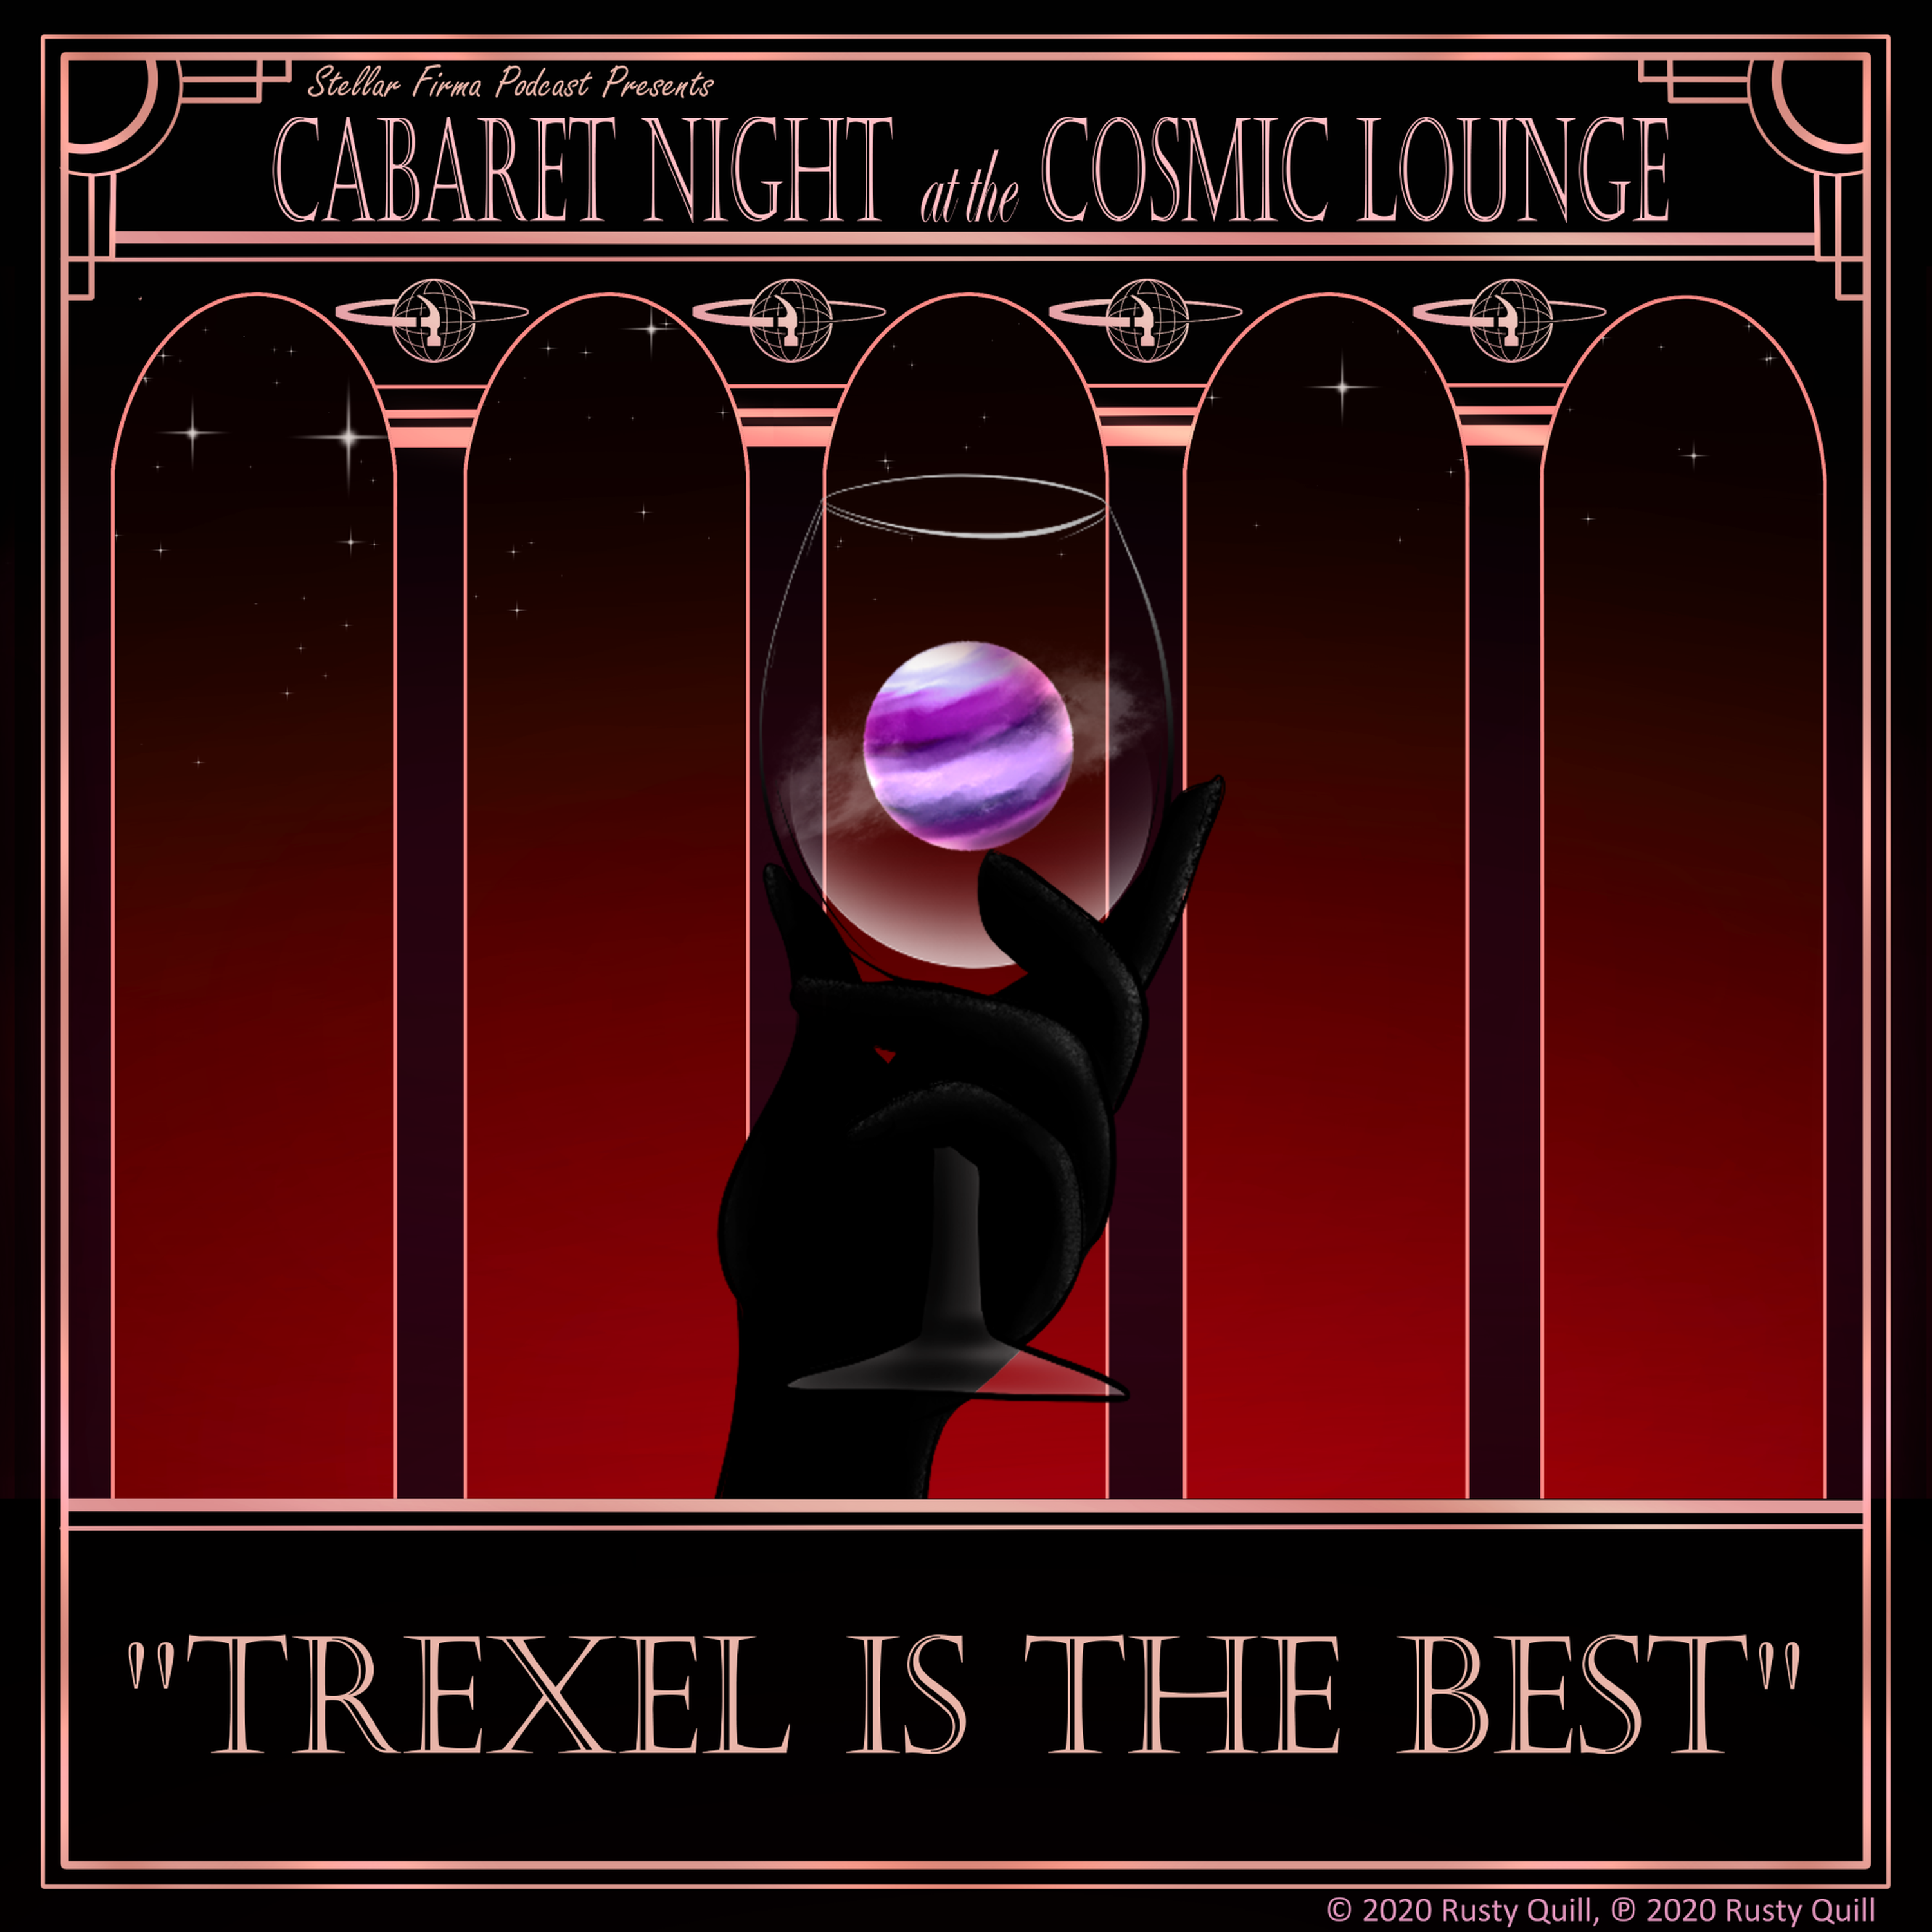 Cabaret Night at the Cosmic Lounge: Trexel is the Best